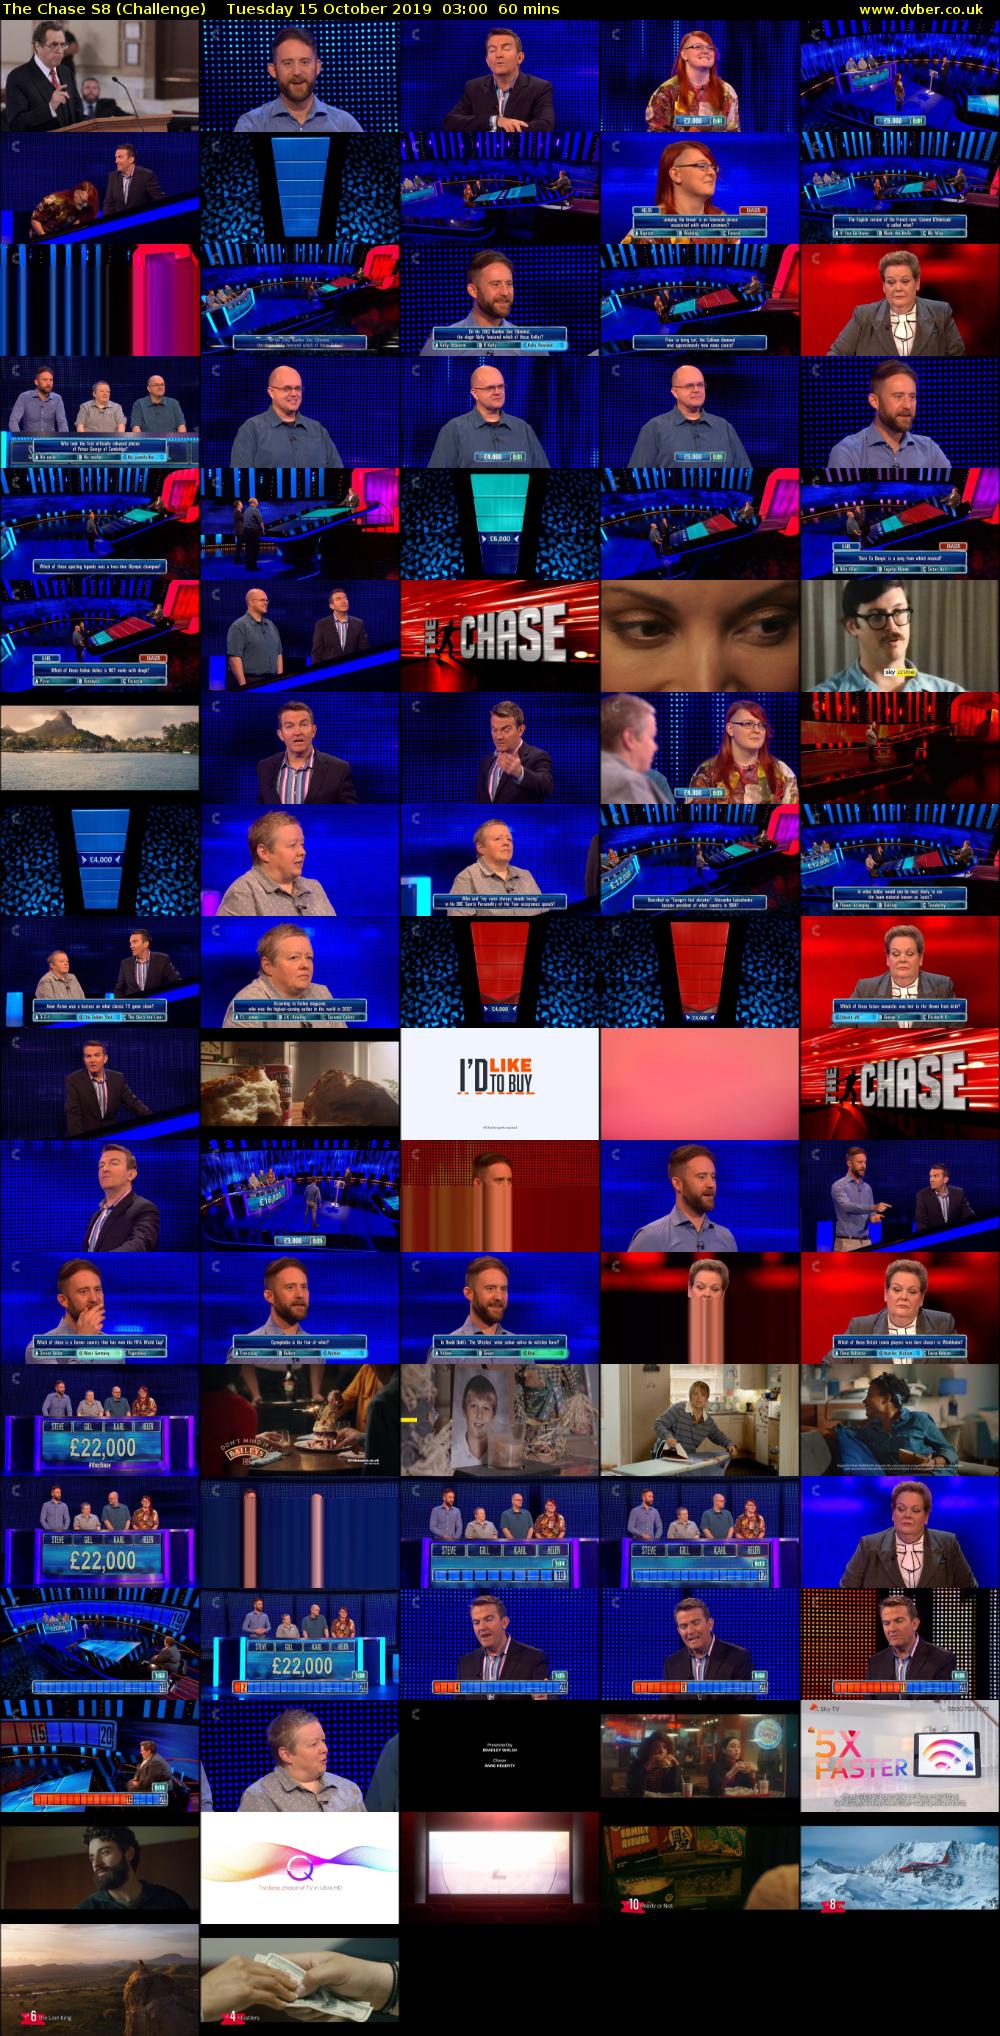 The Chase S8 (Challenge) Tuesday 15 October 2019 03:00 - 04:00